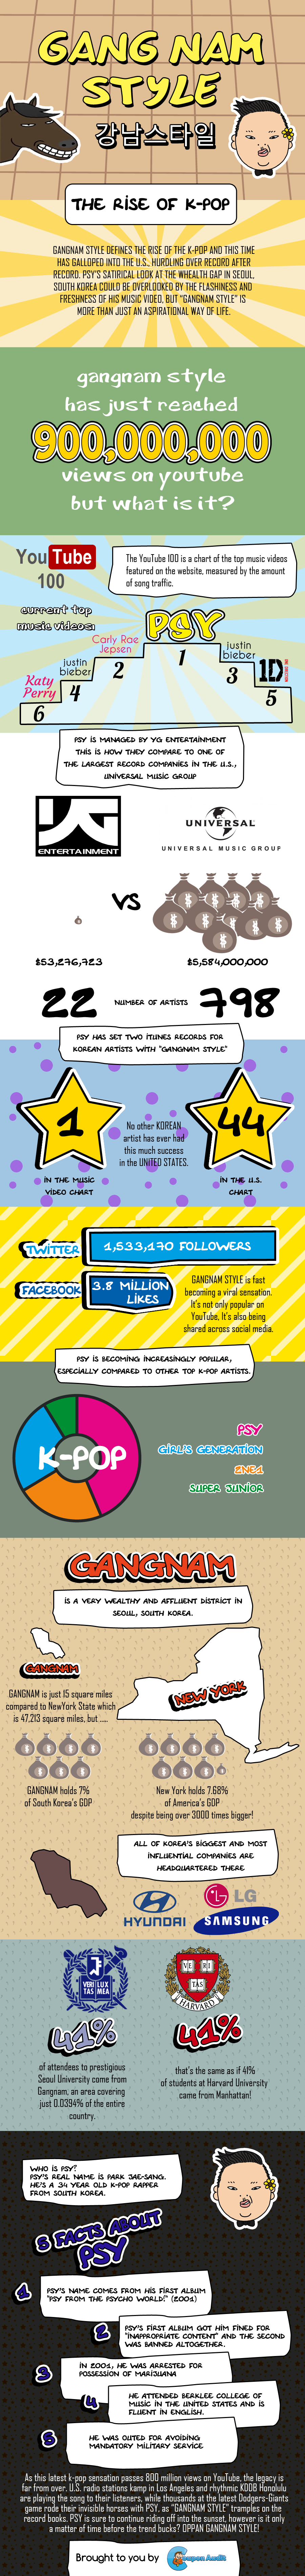 Gangam Style, The Rise [Infographic]